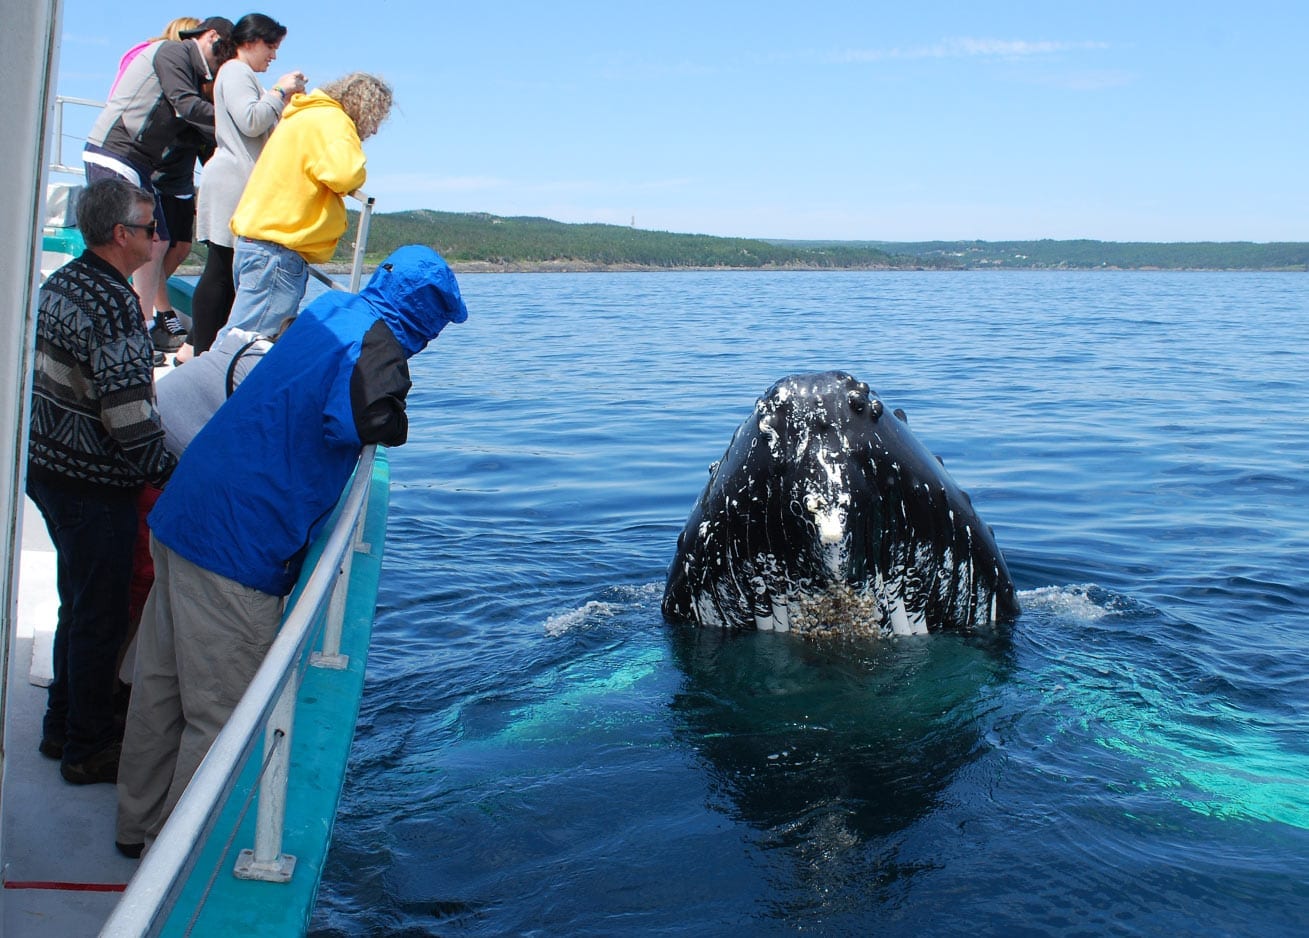 Surreal closeness with whales in Newfoundland